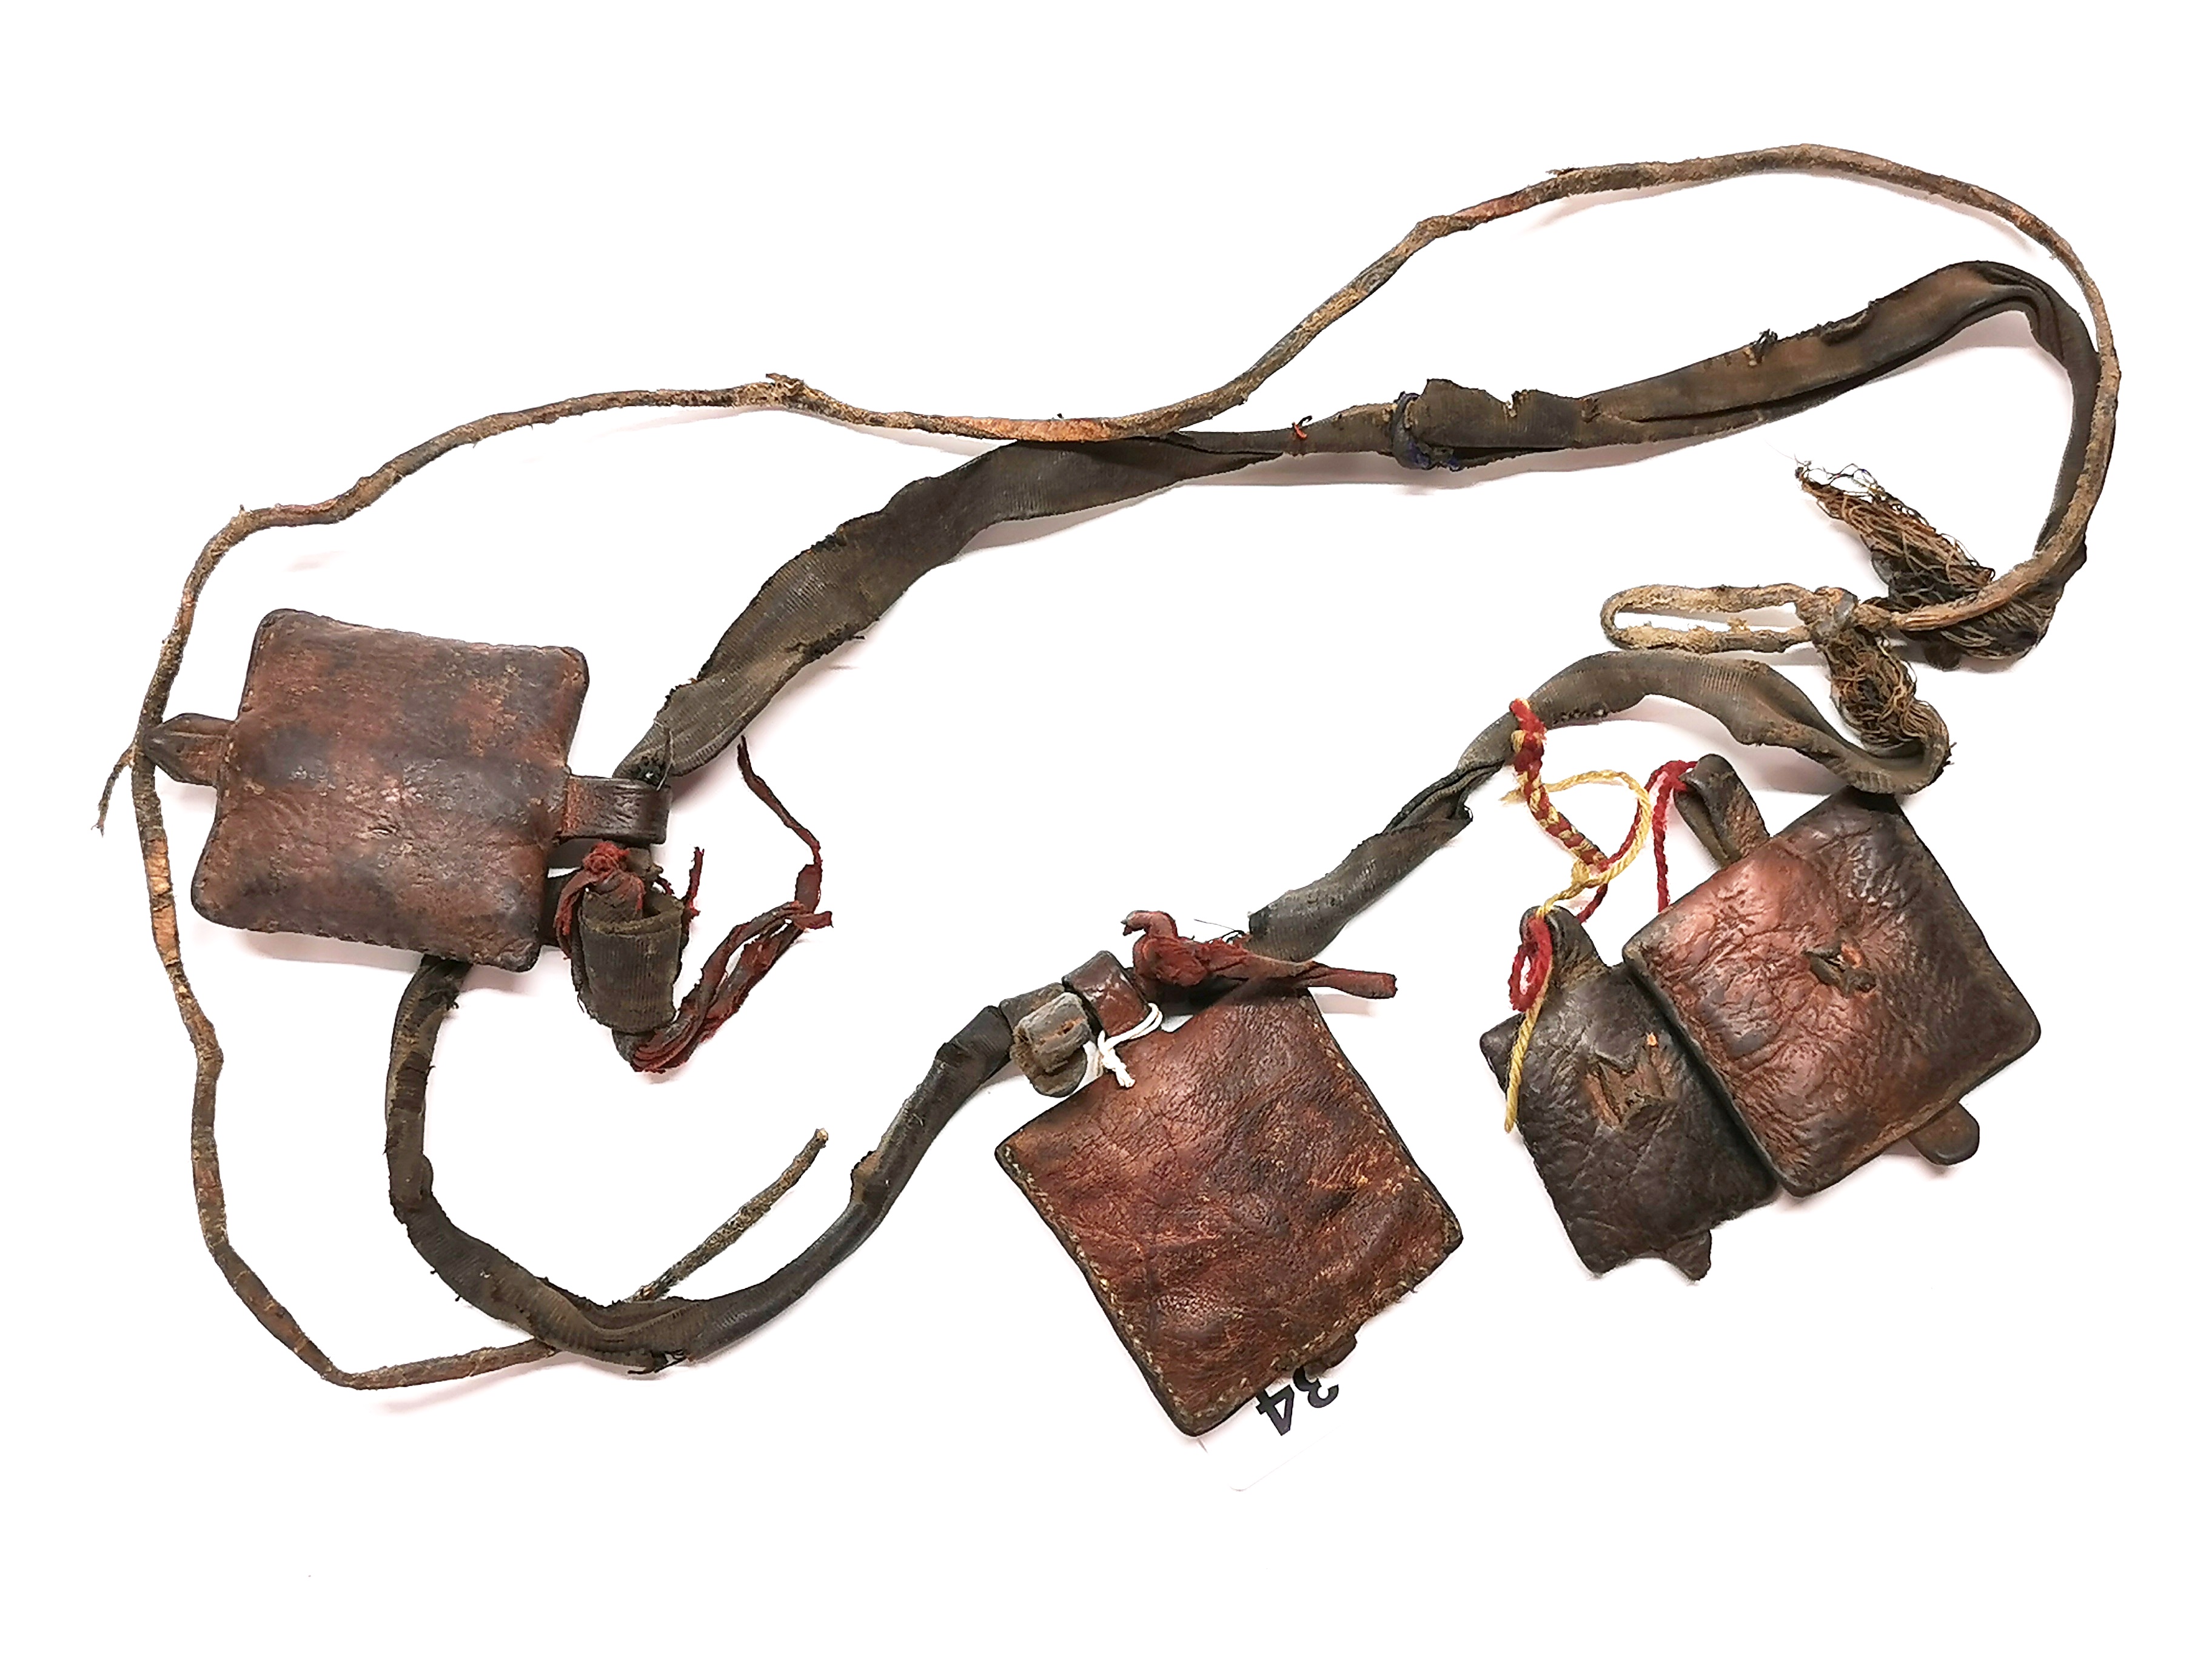 A Tibetan Nomad's leather sash with pouches containing prayers originally from Gyantse, Tibet. Prov.